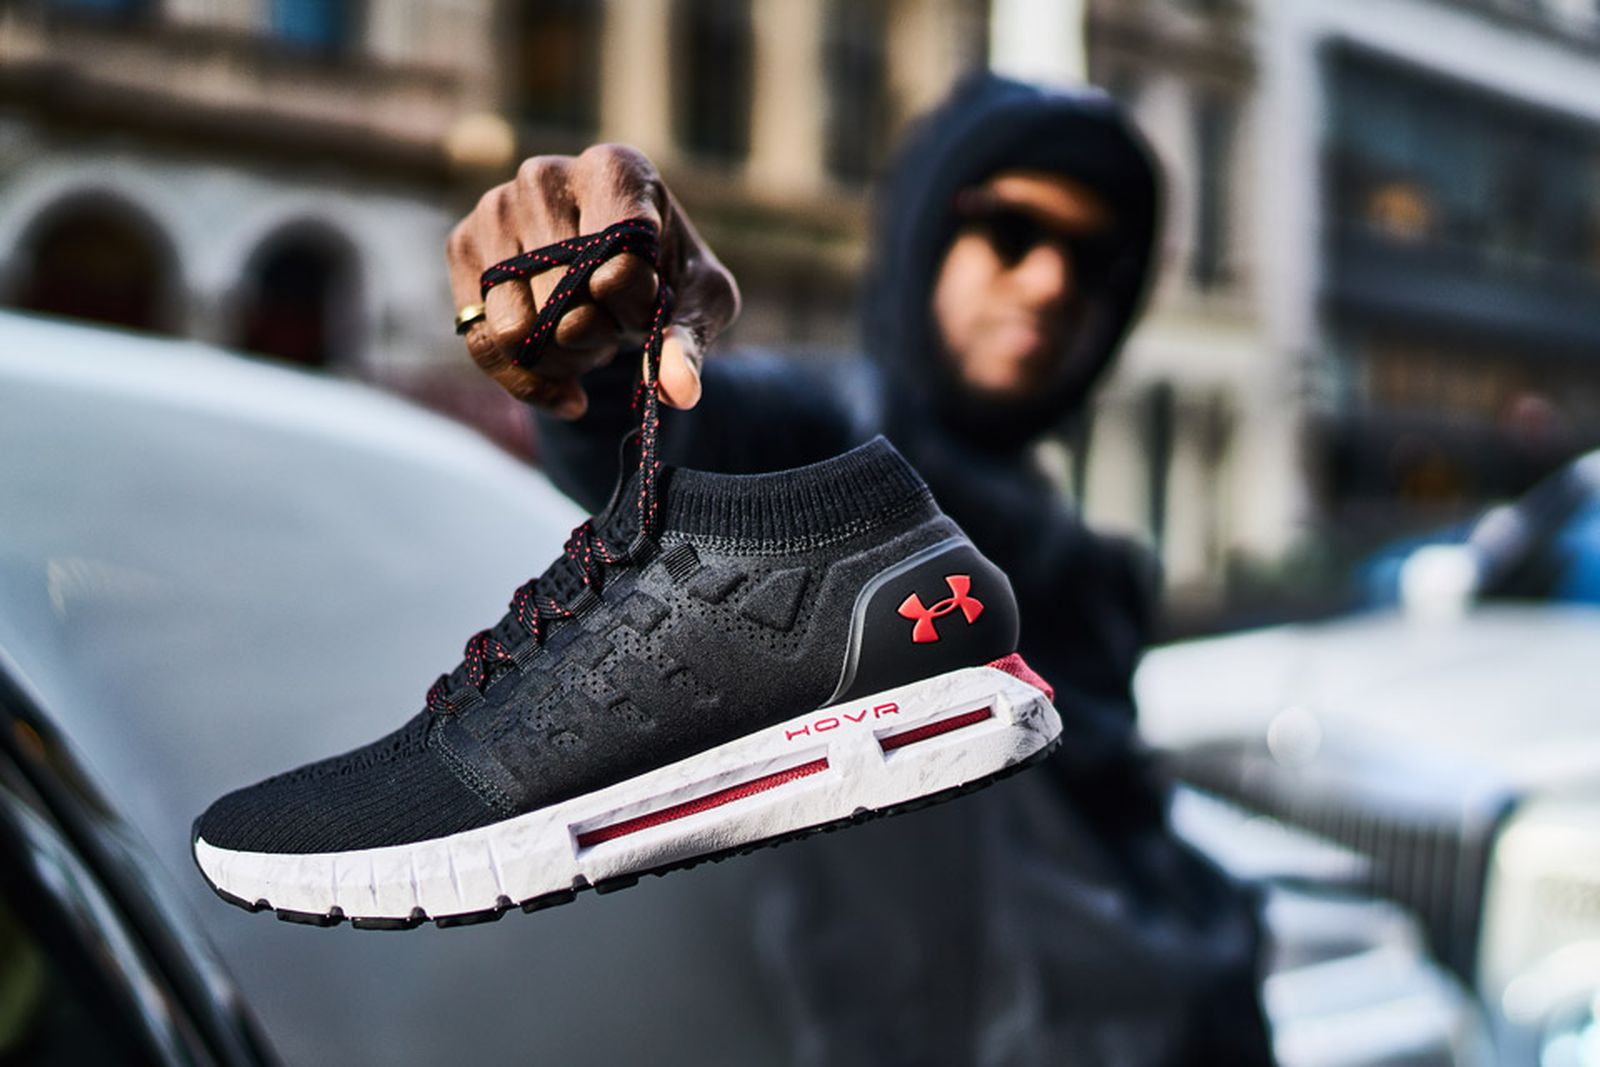 Inscribirse A rayas impermeable Under Armour Launches Innovative Footwear Technology "HOVR"